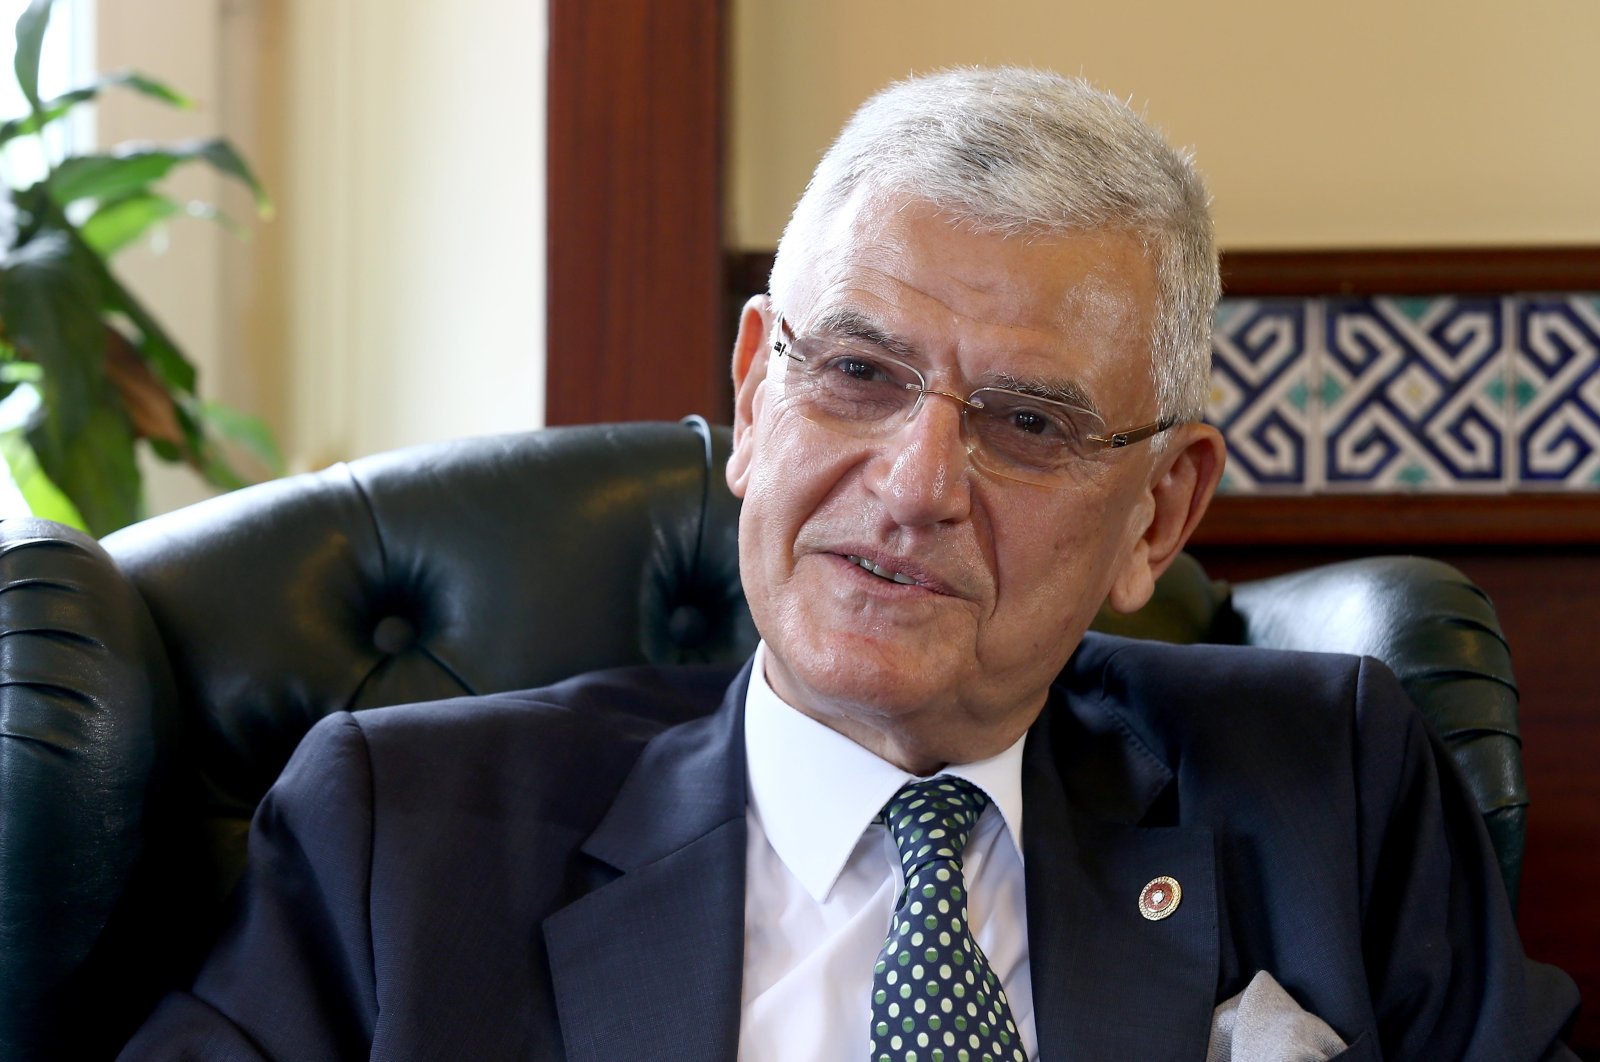 Volkan Bozkır, a former Turkish ambassador recently elected as the 75th president of the U.N. General Assembly. (AA Photo)

